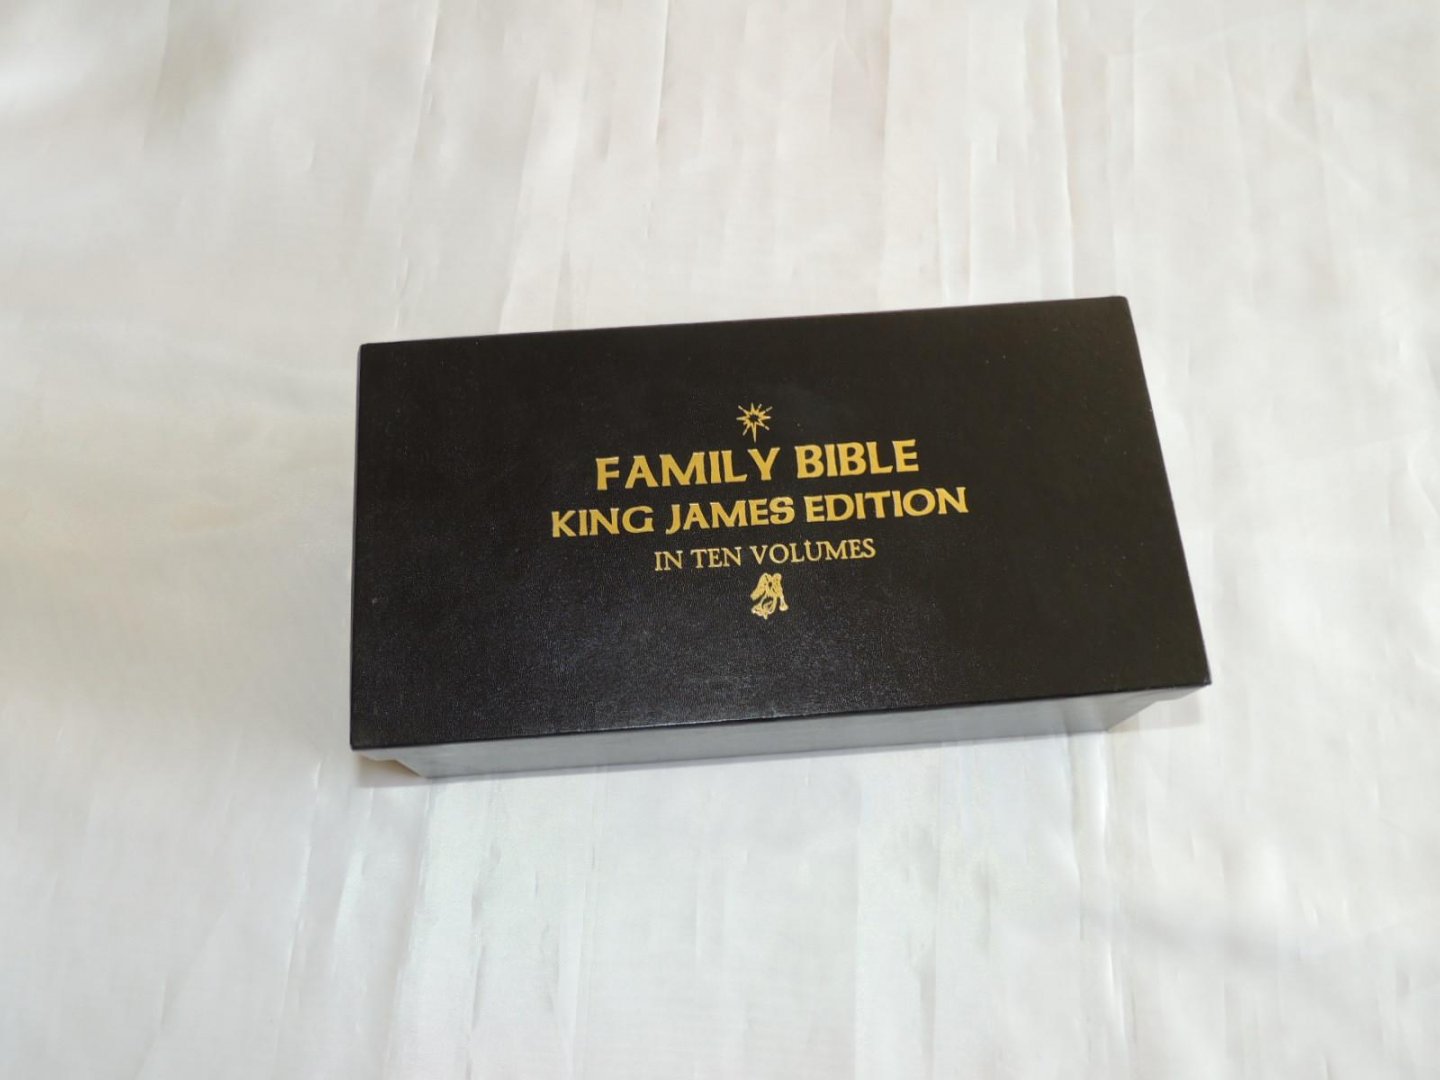  - Family Bible King James edition in ten volumes